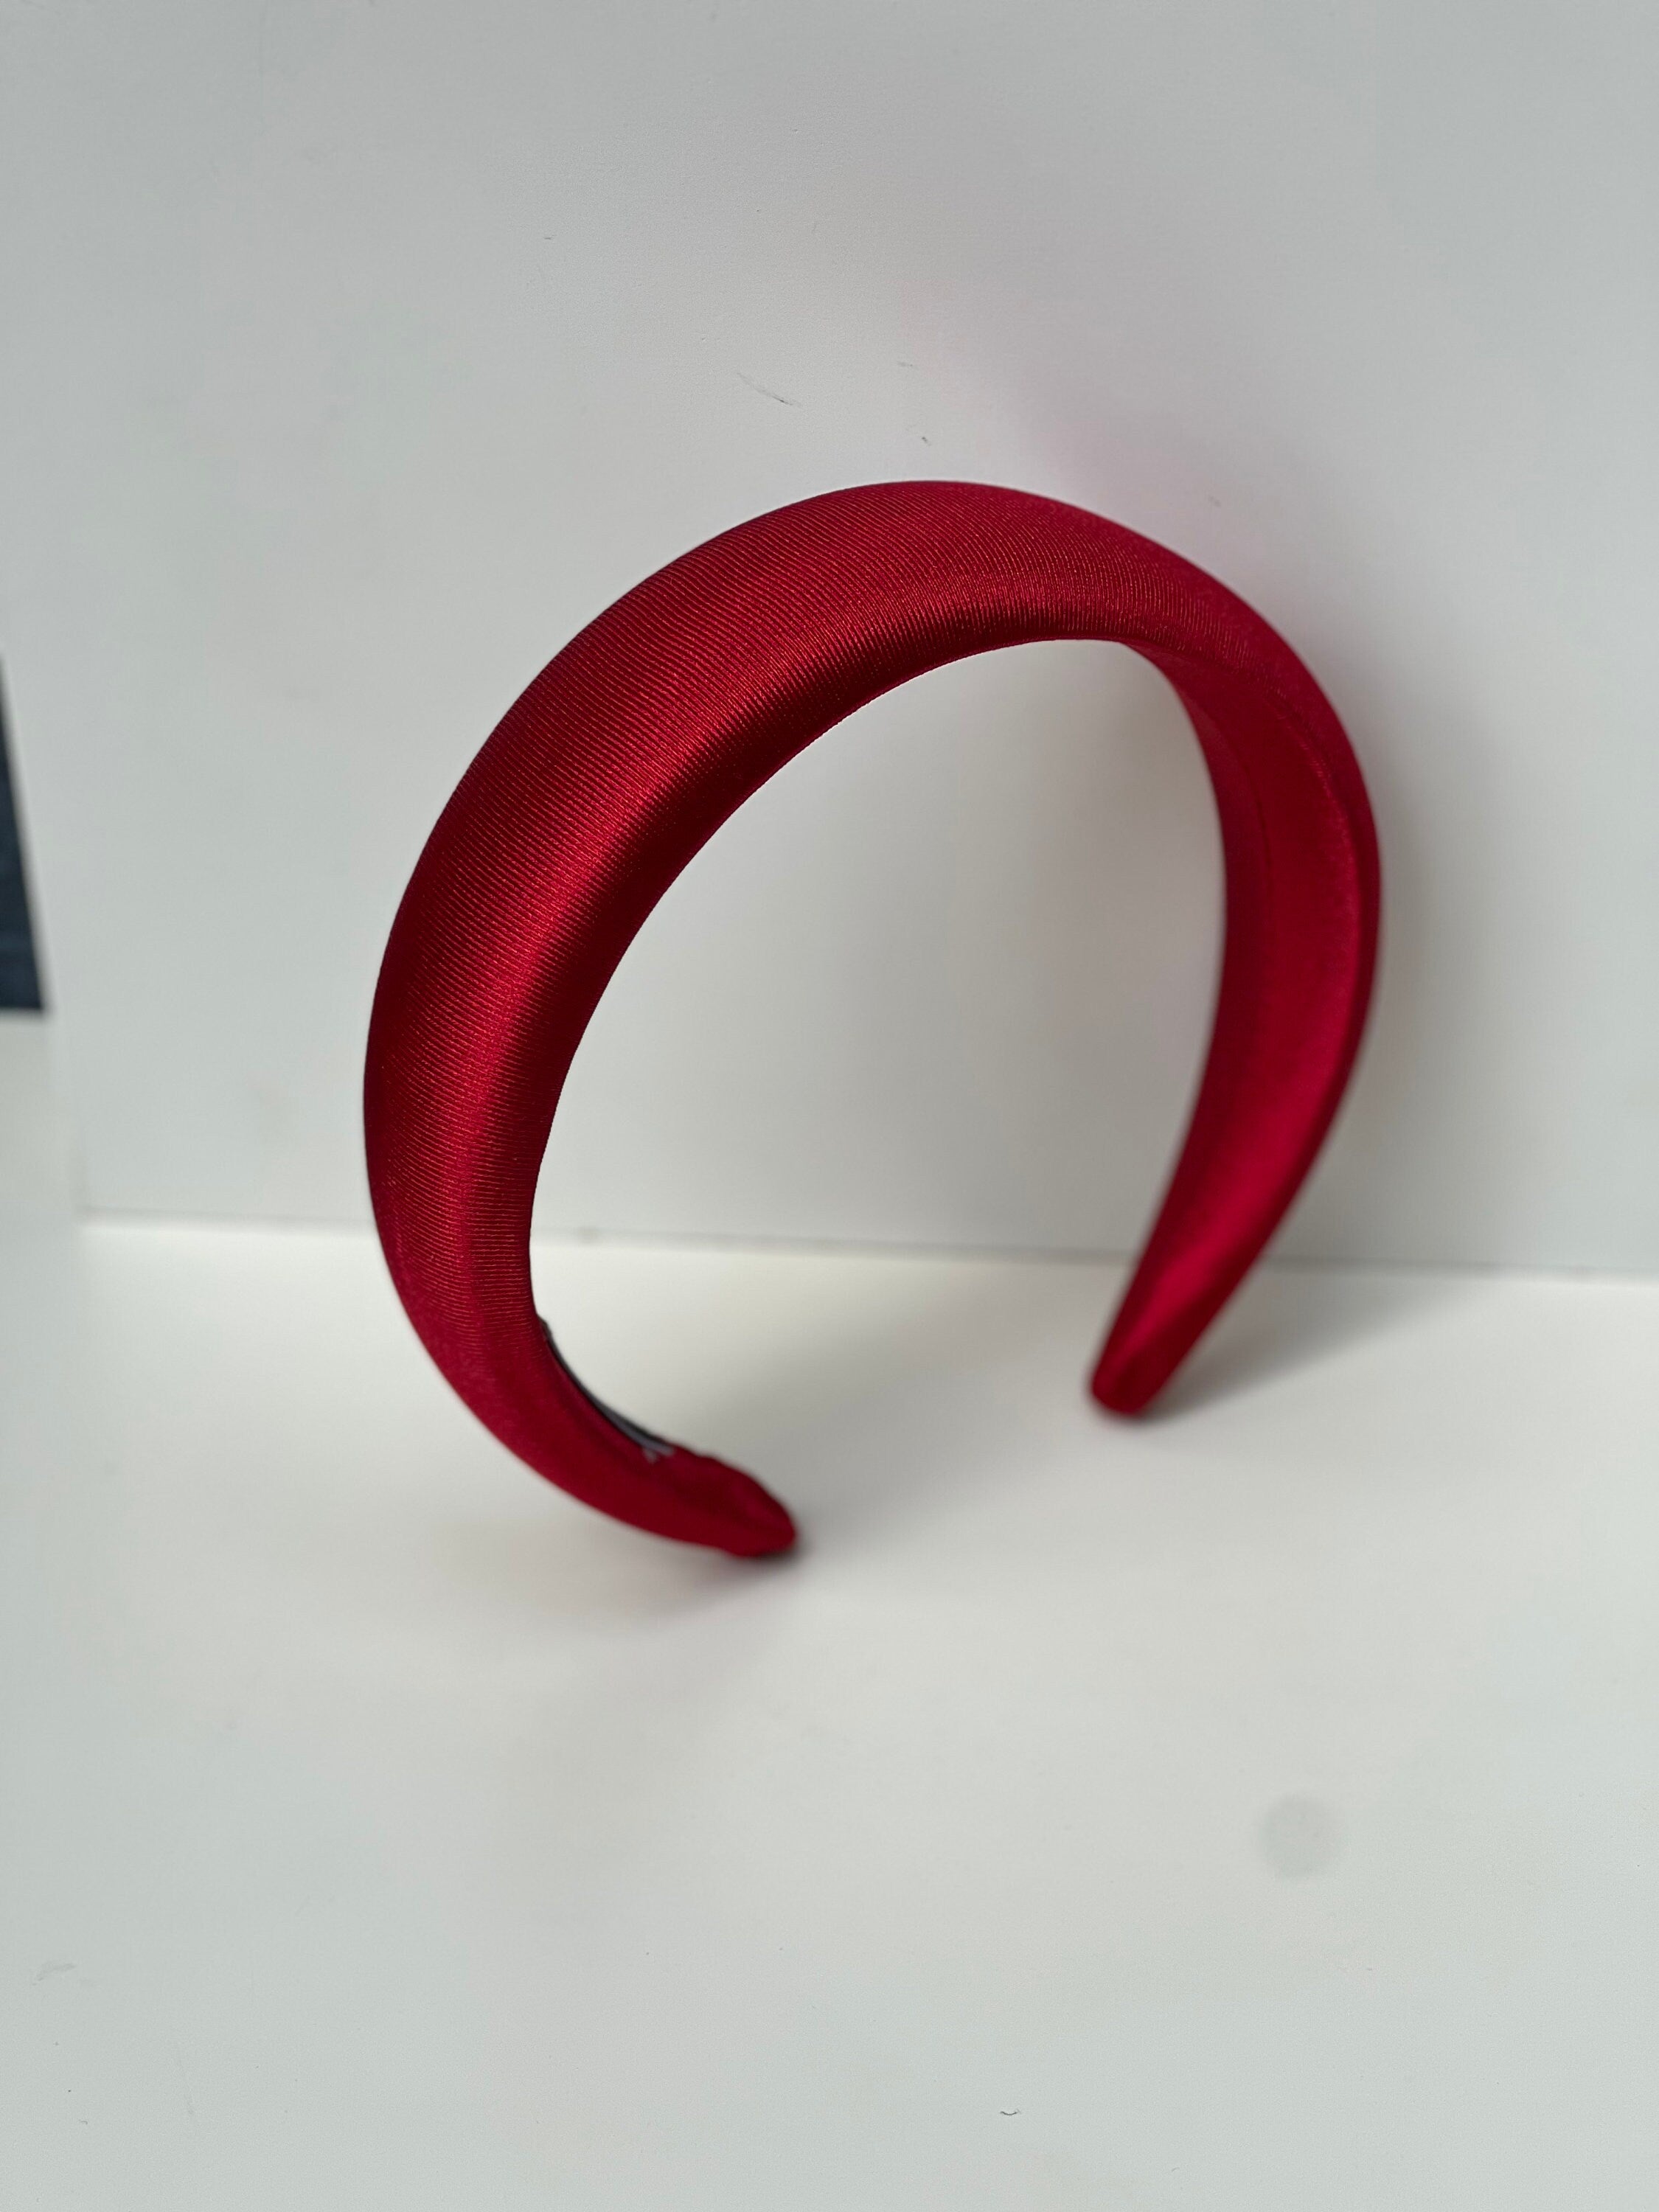 Stay comfortable and fashionable with this red padded headband, perfect for any outfit.